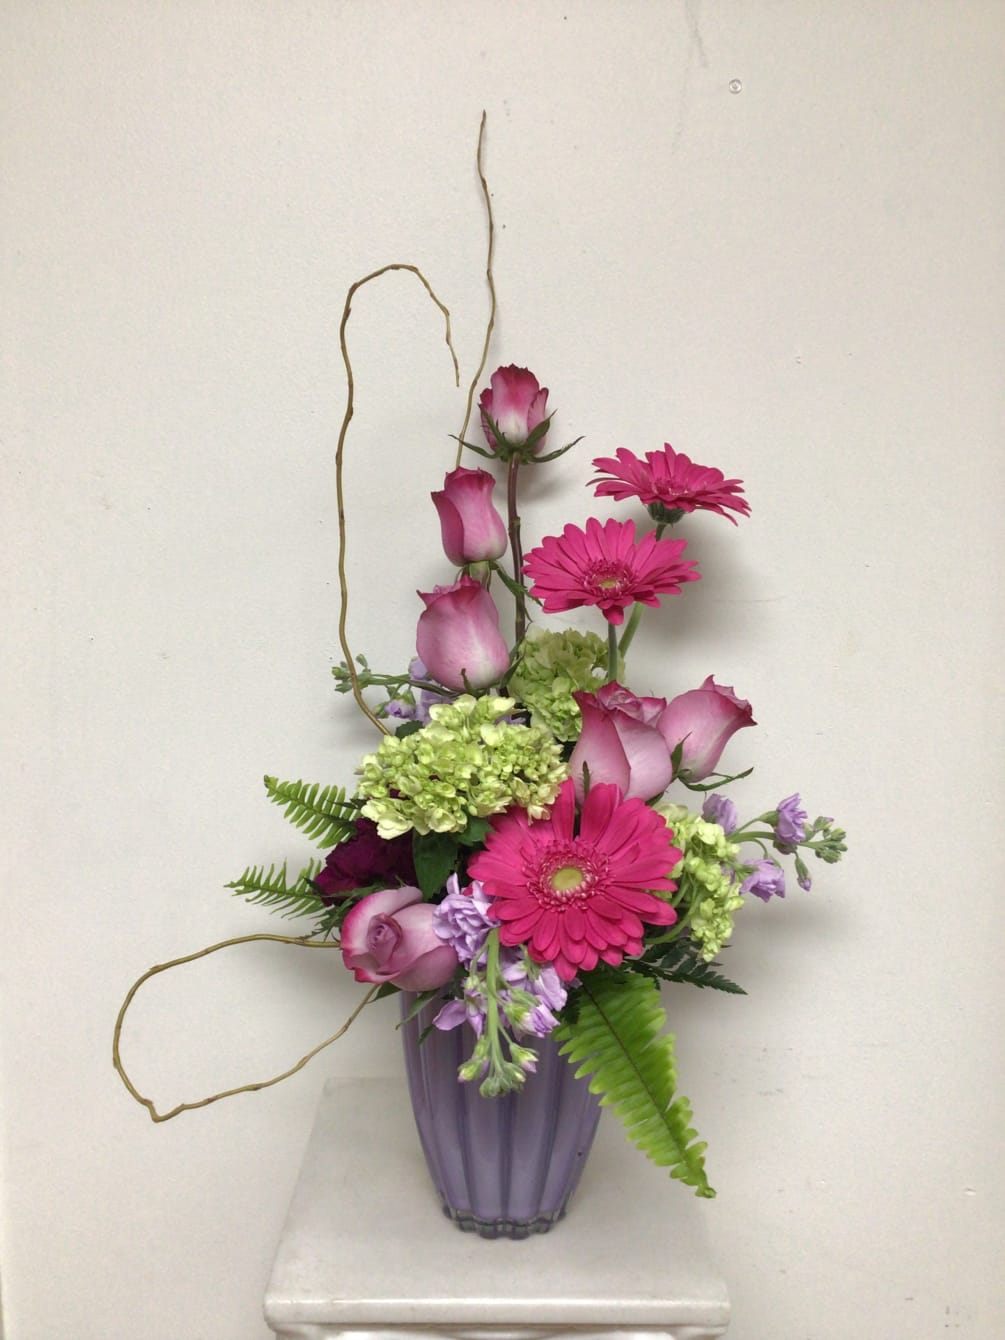 This contemporary arrangement is arranged in a lavender clam shell vase and